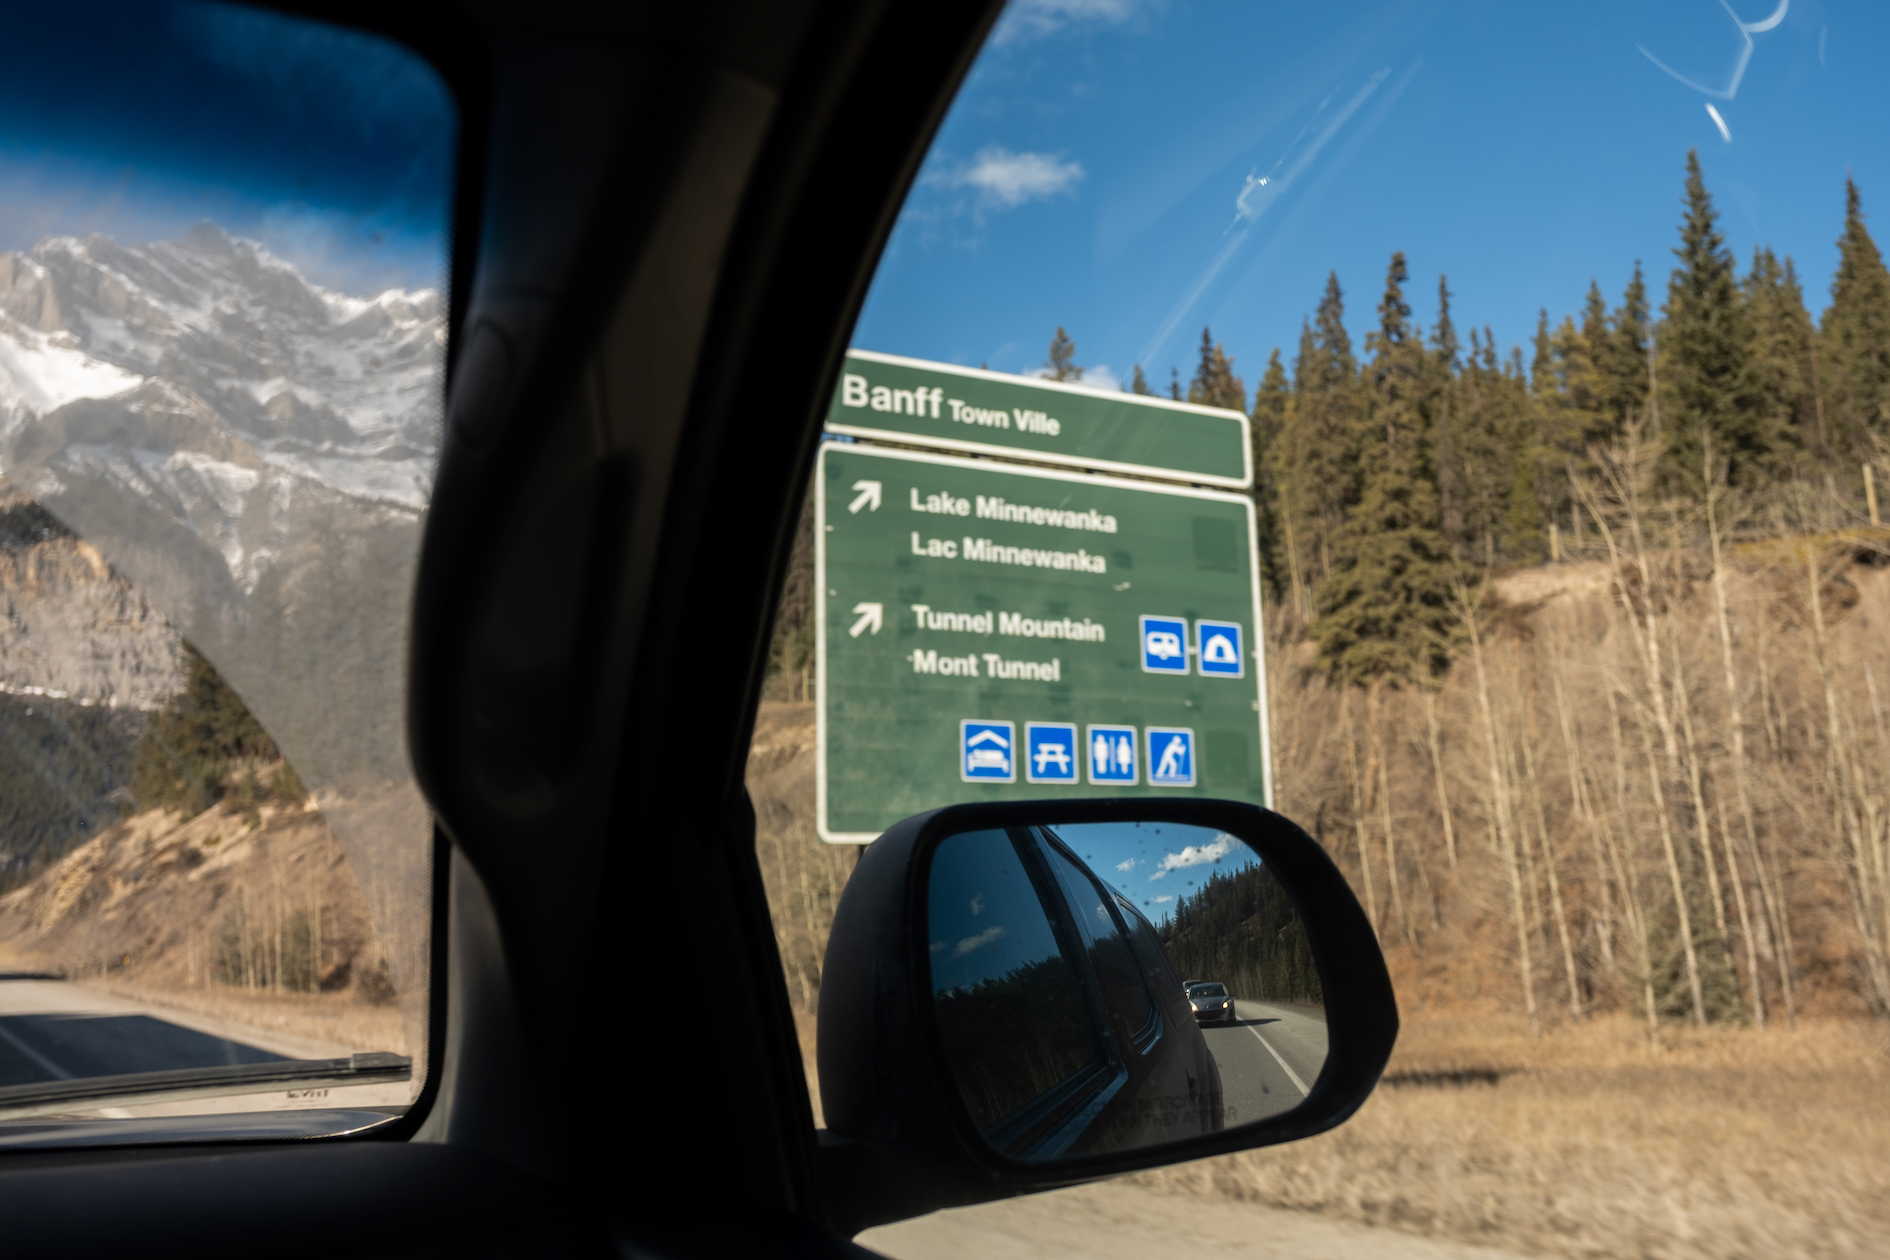 Exits for Banff